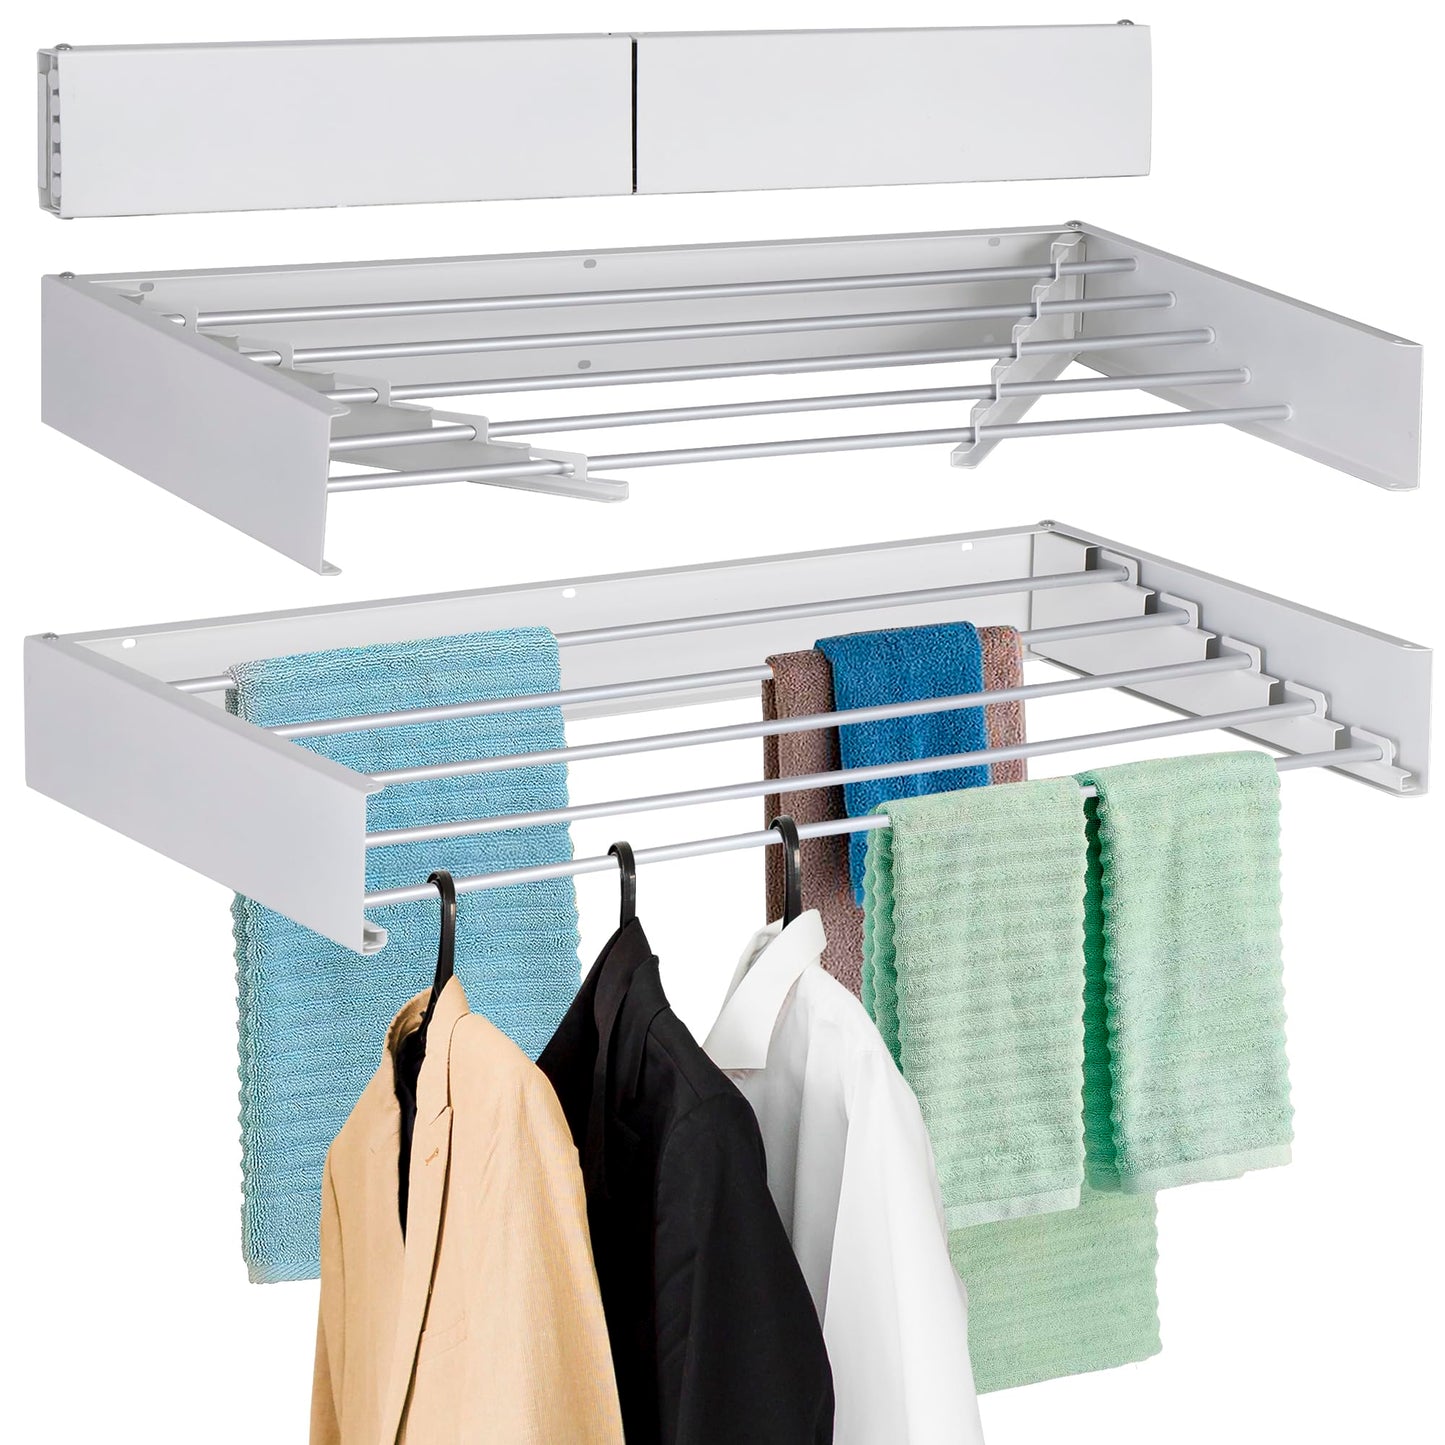 F Wall Mounted Clothes Drying Rack Collapsible for Laundry 40" with Drilling Template Aluminum Rods and Long Screwdriver Bit 60 lbs Capacity White